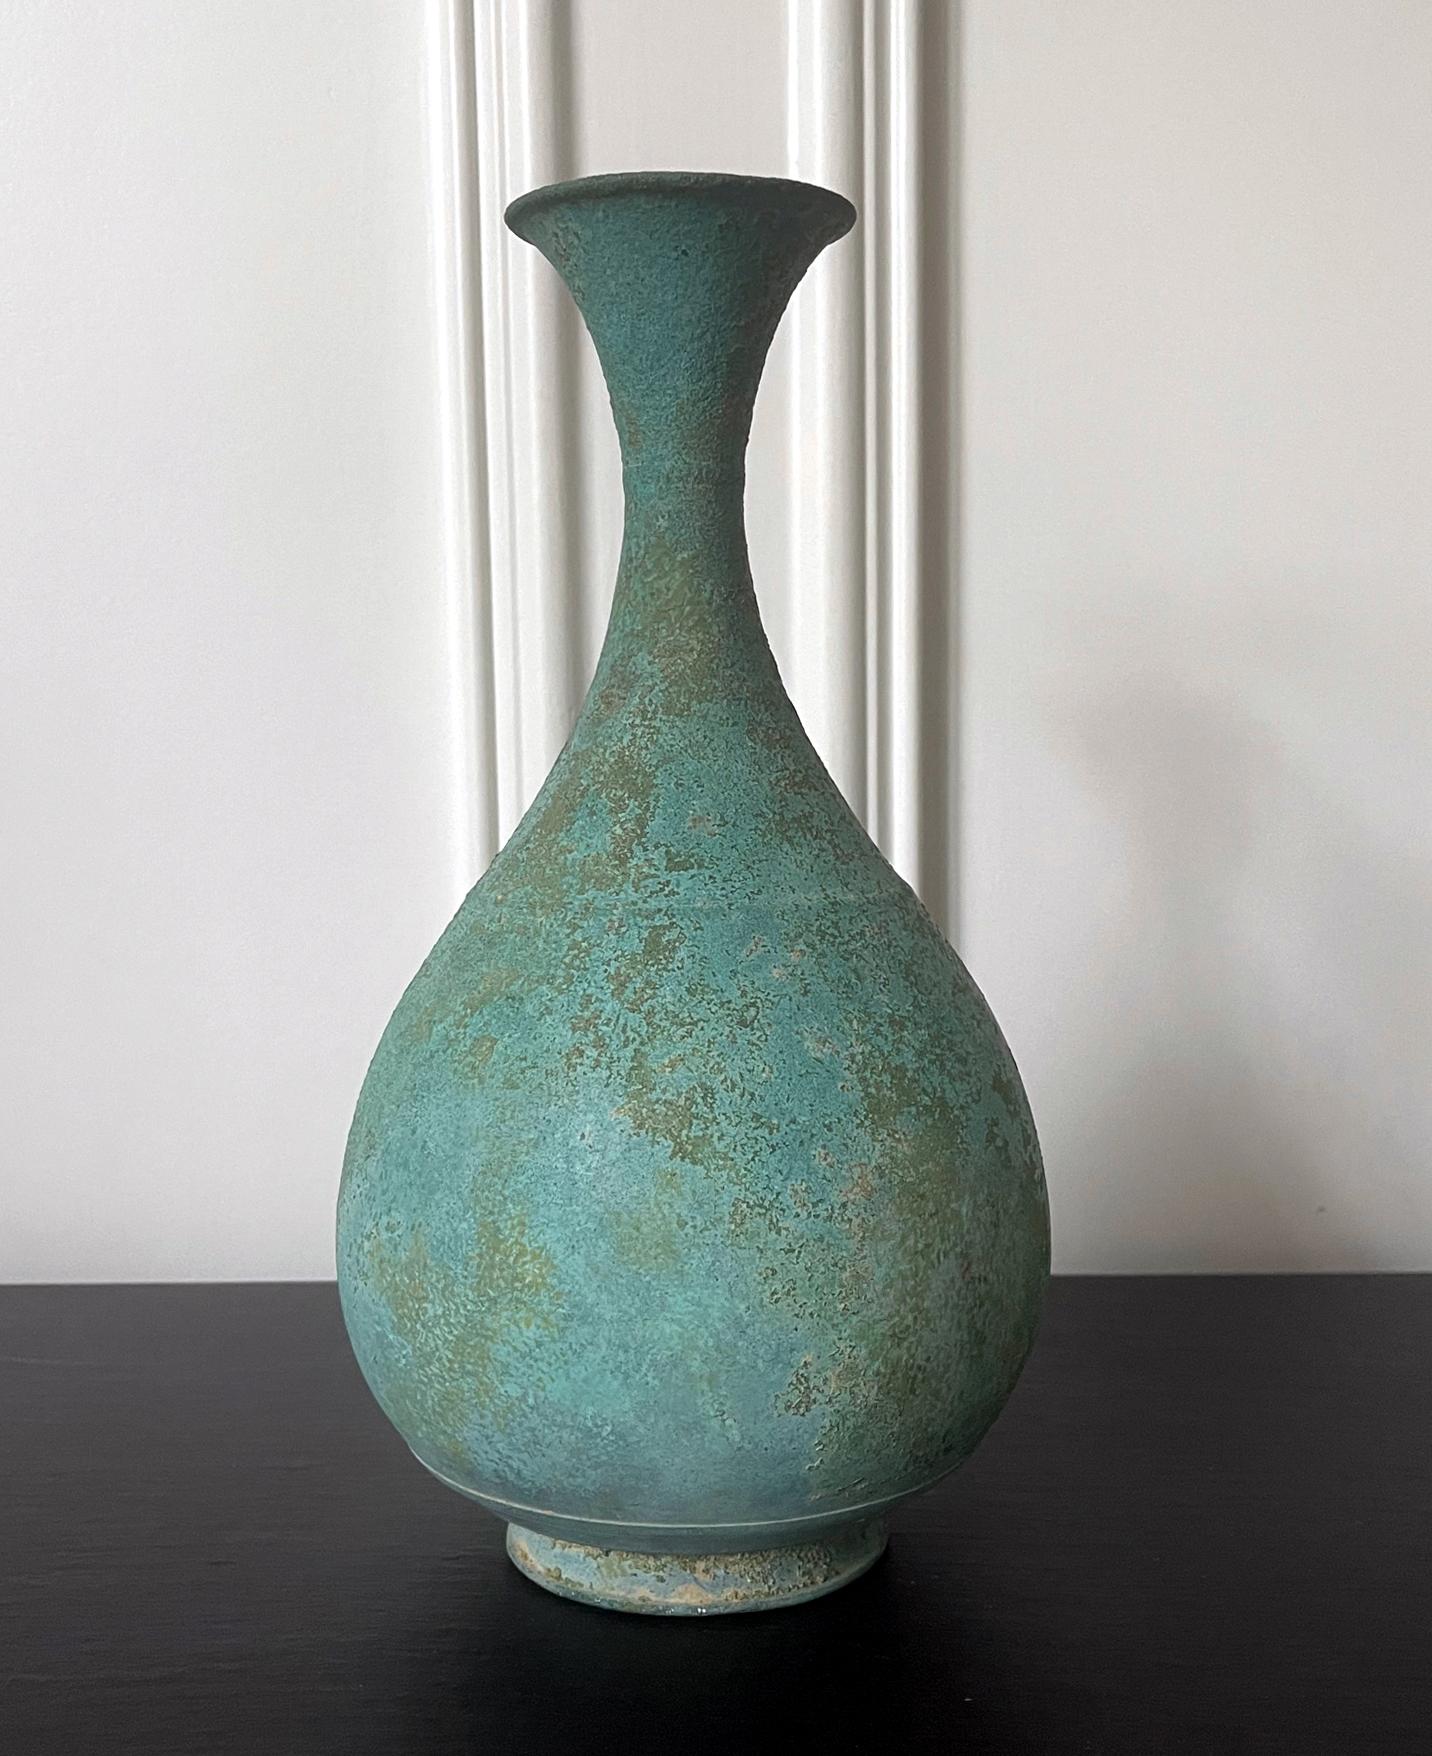 An antique Korean bronze bottle of bulbous pear form with a long neck and flared open mouth from Goryeo Dynasty (918 AD-1392 AD) circa 12-13th century It was thought that the type of bottle with such harmonious form and proportion was inspired from